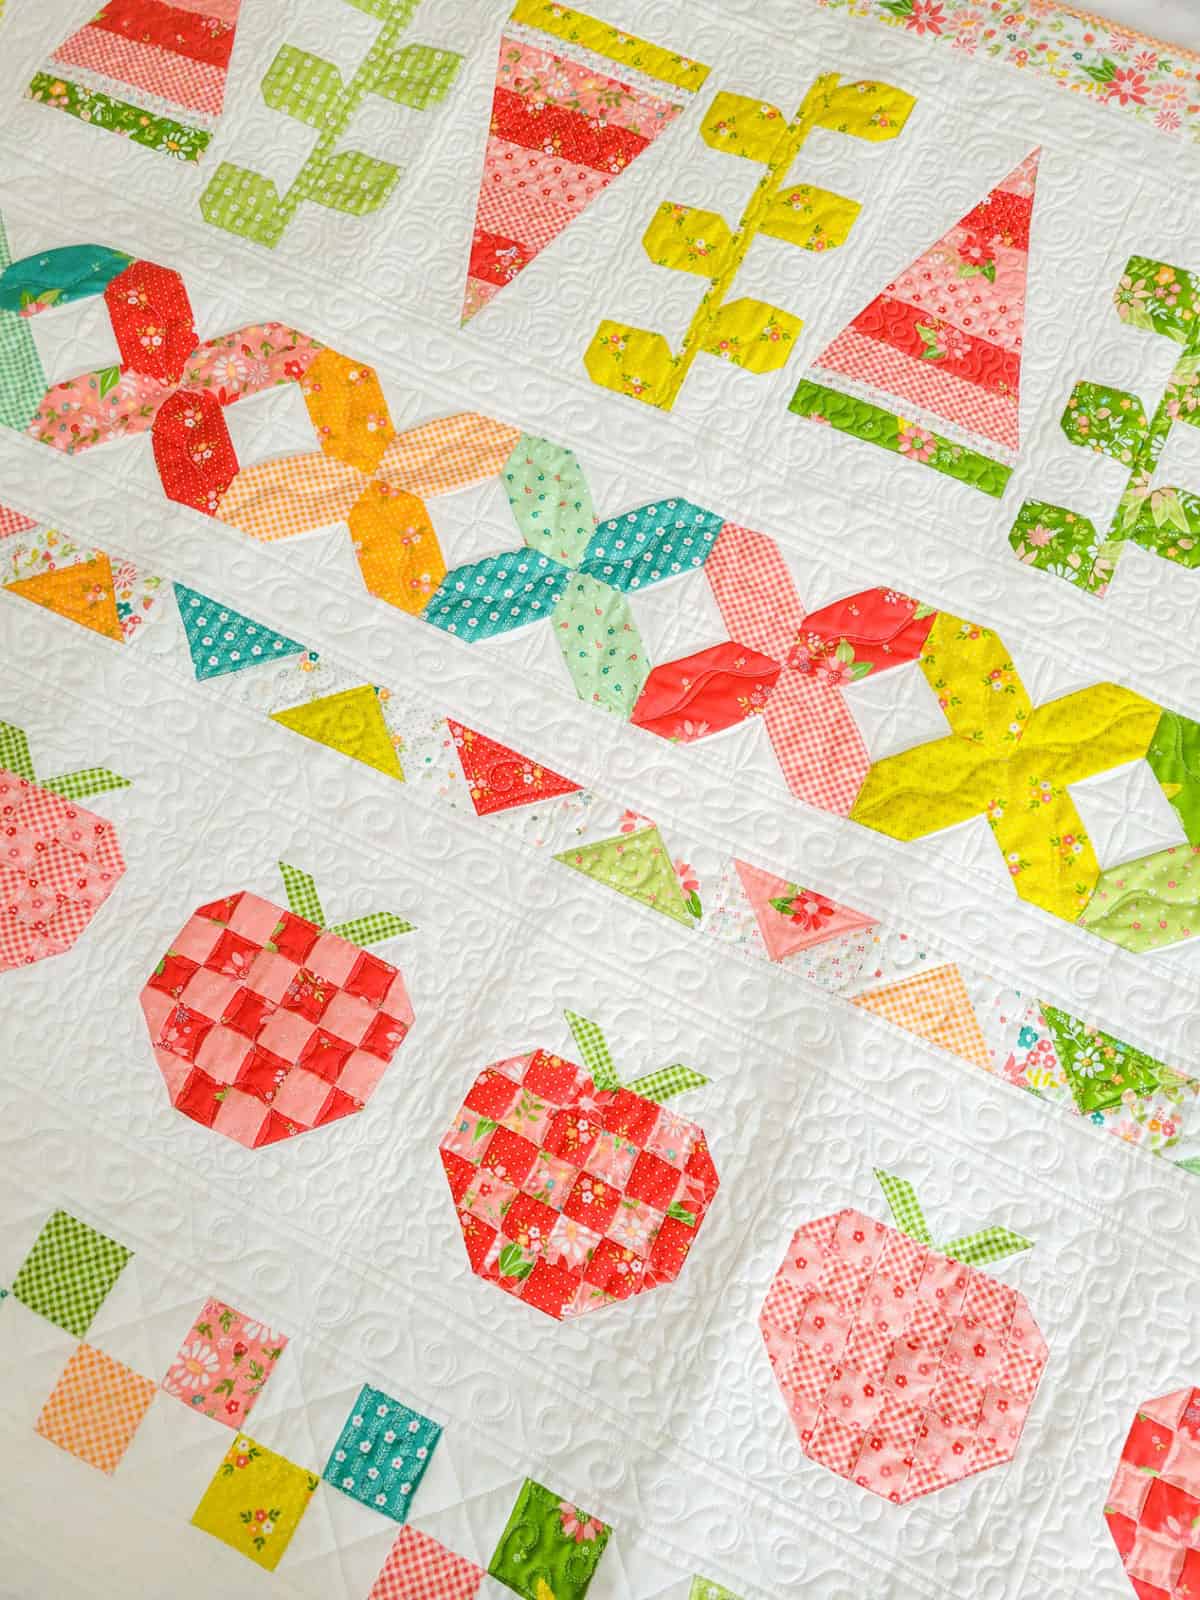 Brightly colored quilt wall hanging with watermelon, vines, strawberries, and patchwork designs.